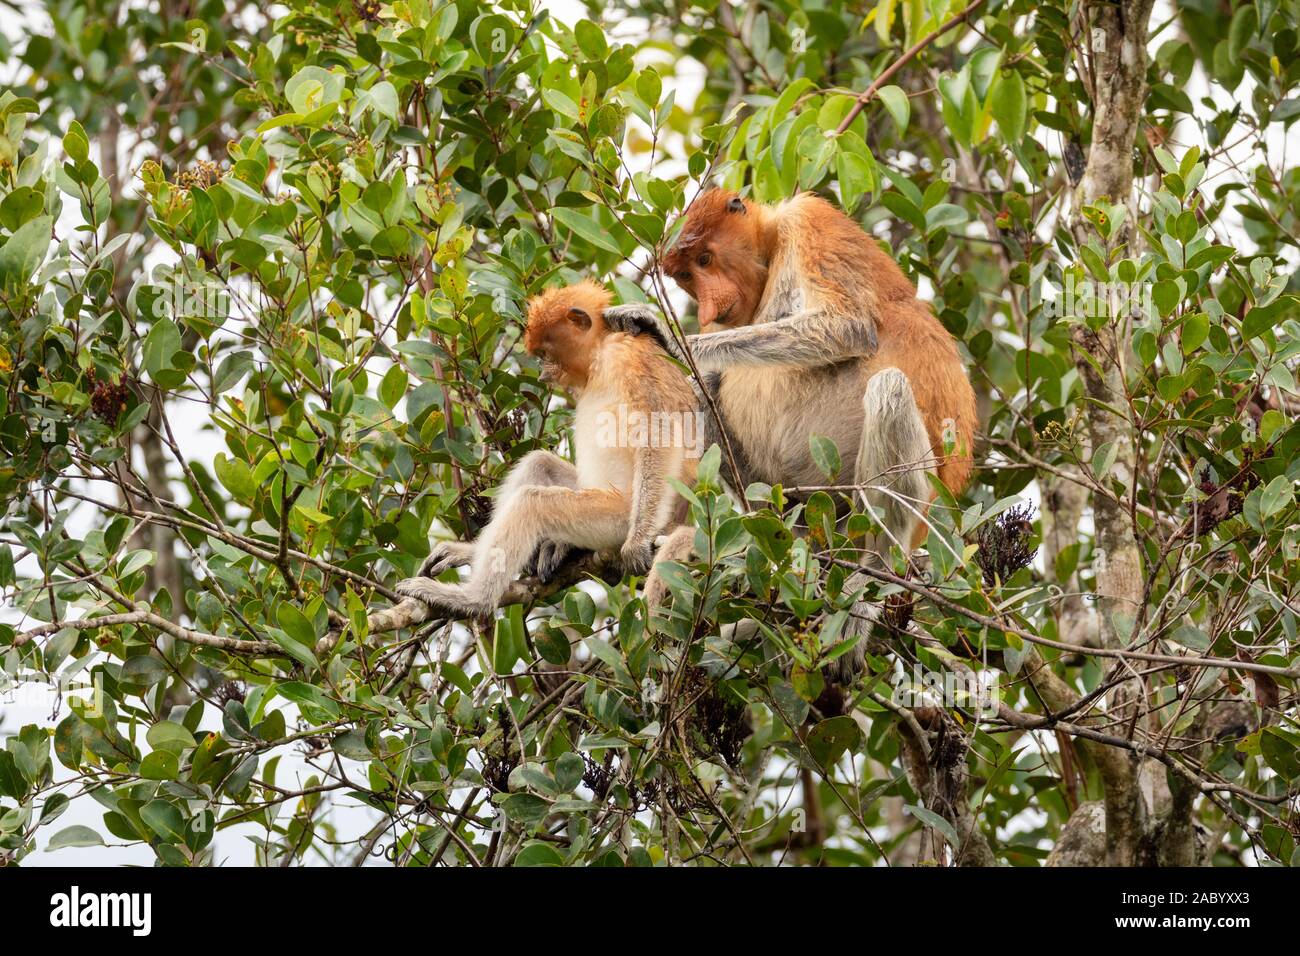 Wild Proboscis monkey mother grooming her young in trees in Tanjung Puting National Park, Kalimantan, Borneo Stock Photo